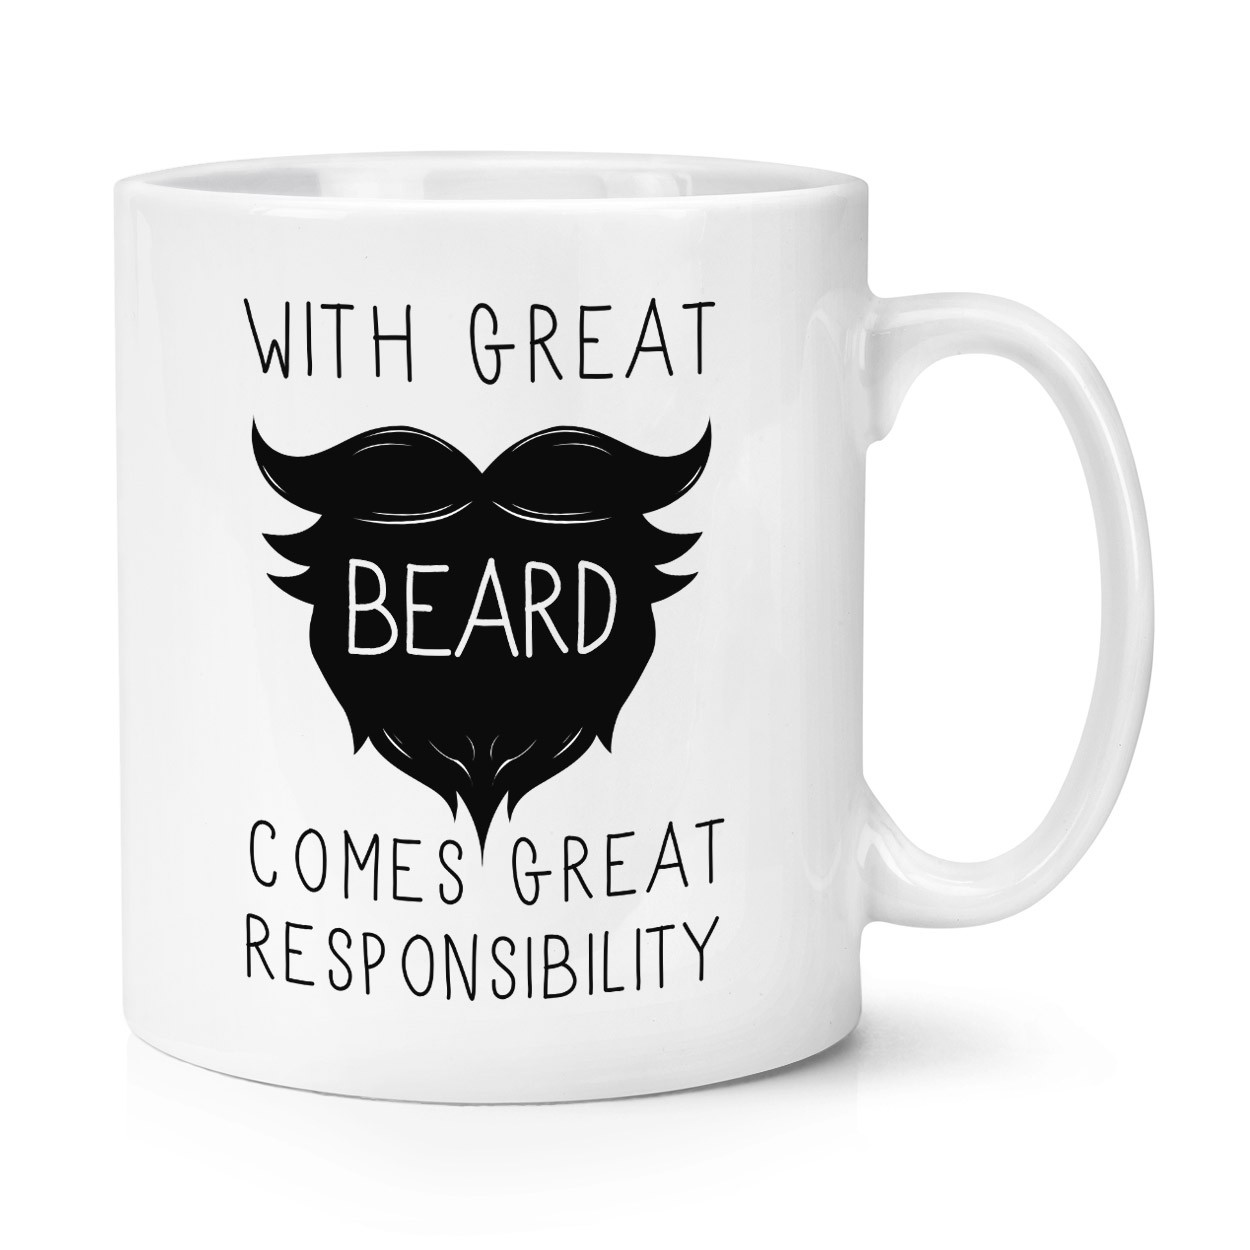 With Great Beard Comes Great Responsibility 10oz Mug Cup